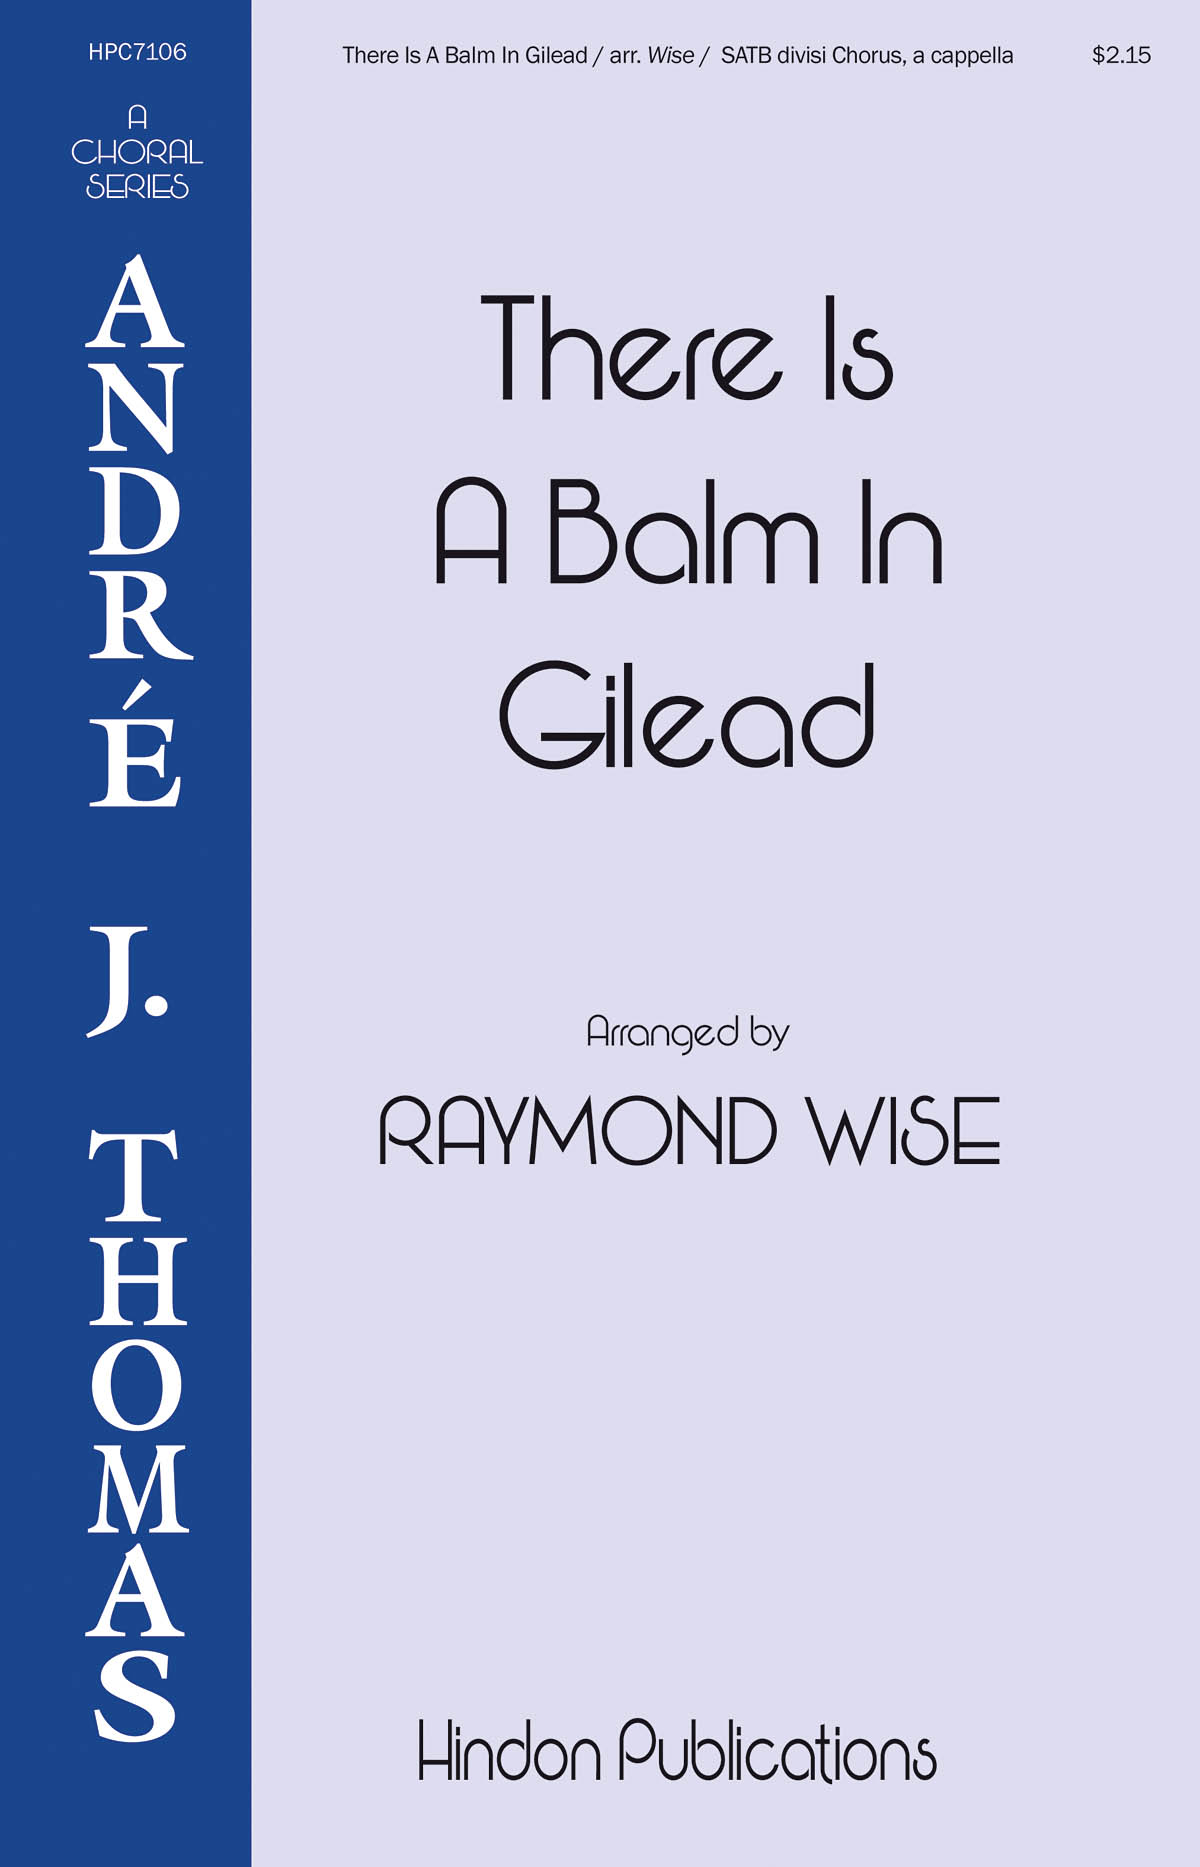 There Is a Balm in Gilead: Mixed Choir a Cappella